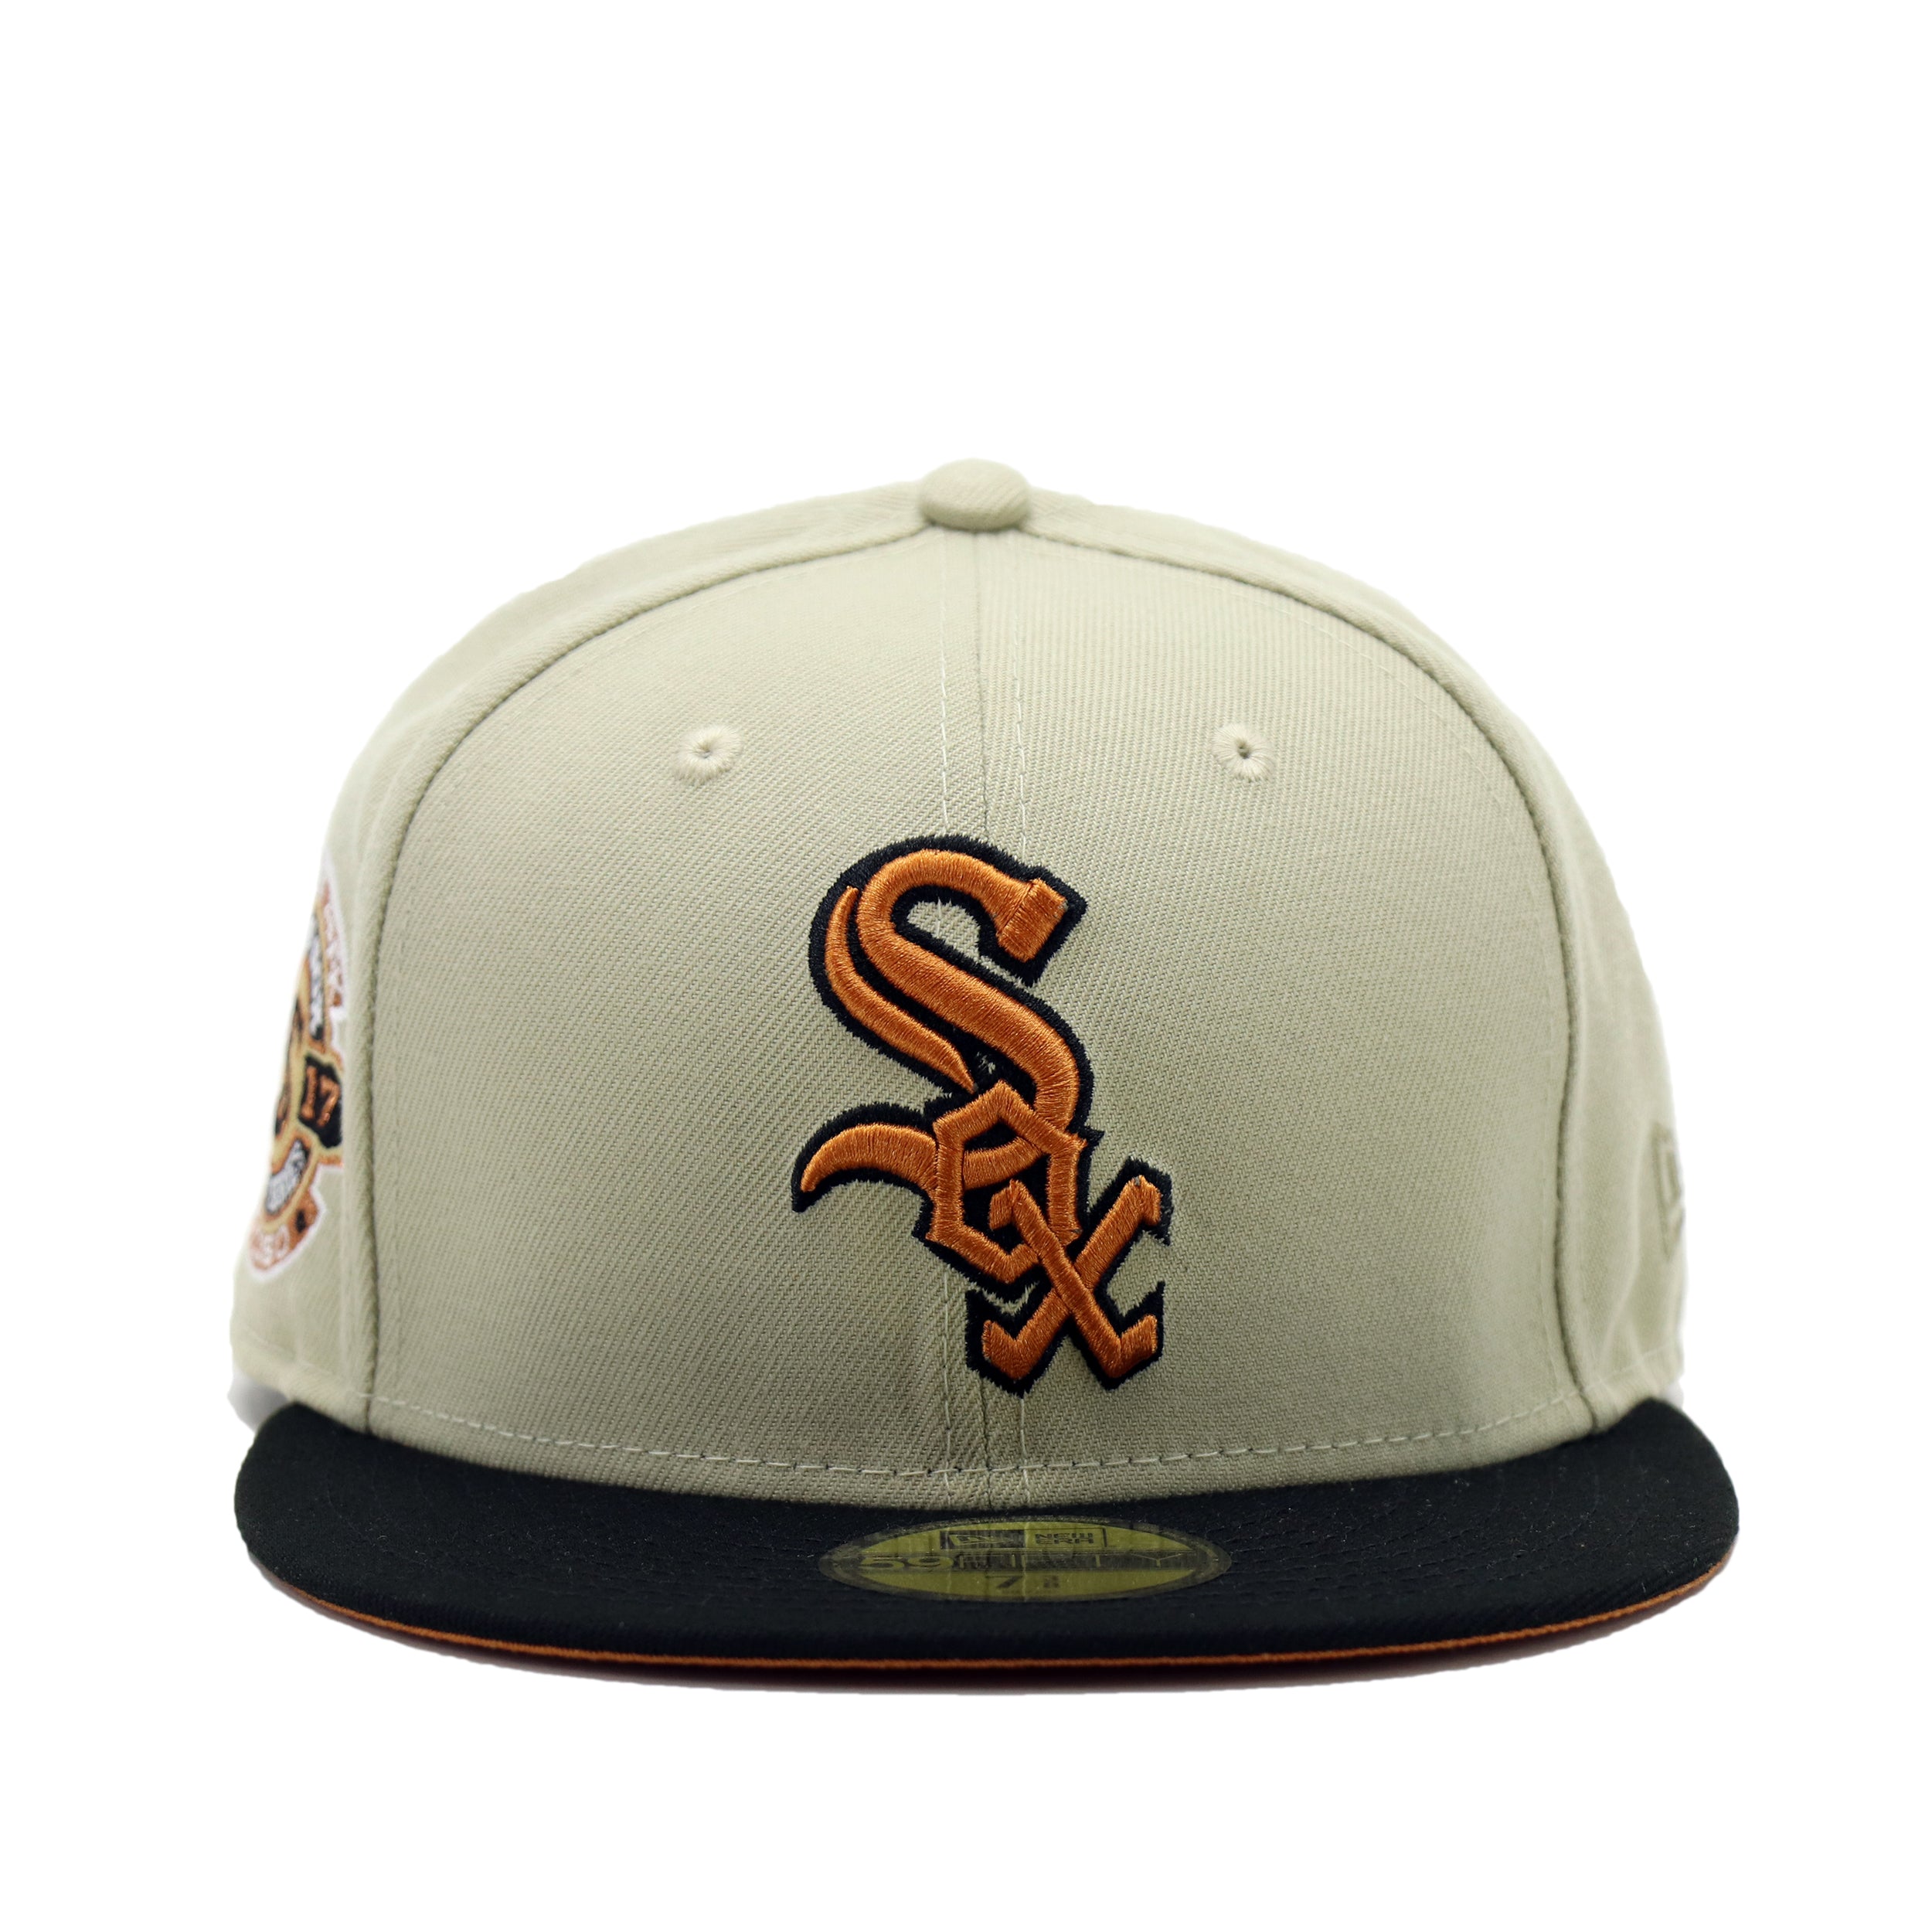 NEW ERA x THE CAP 5950 CHIWHI FEATHER - キャップ